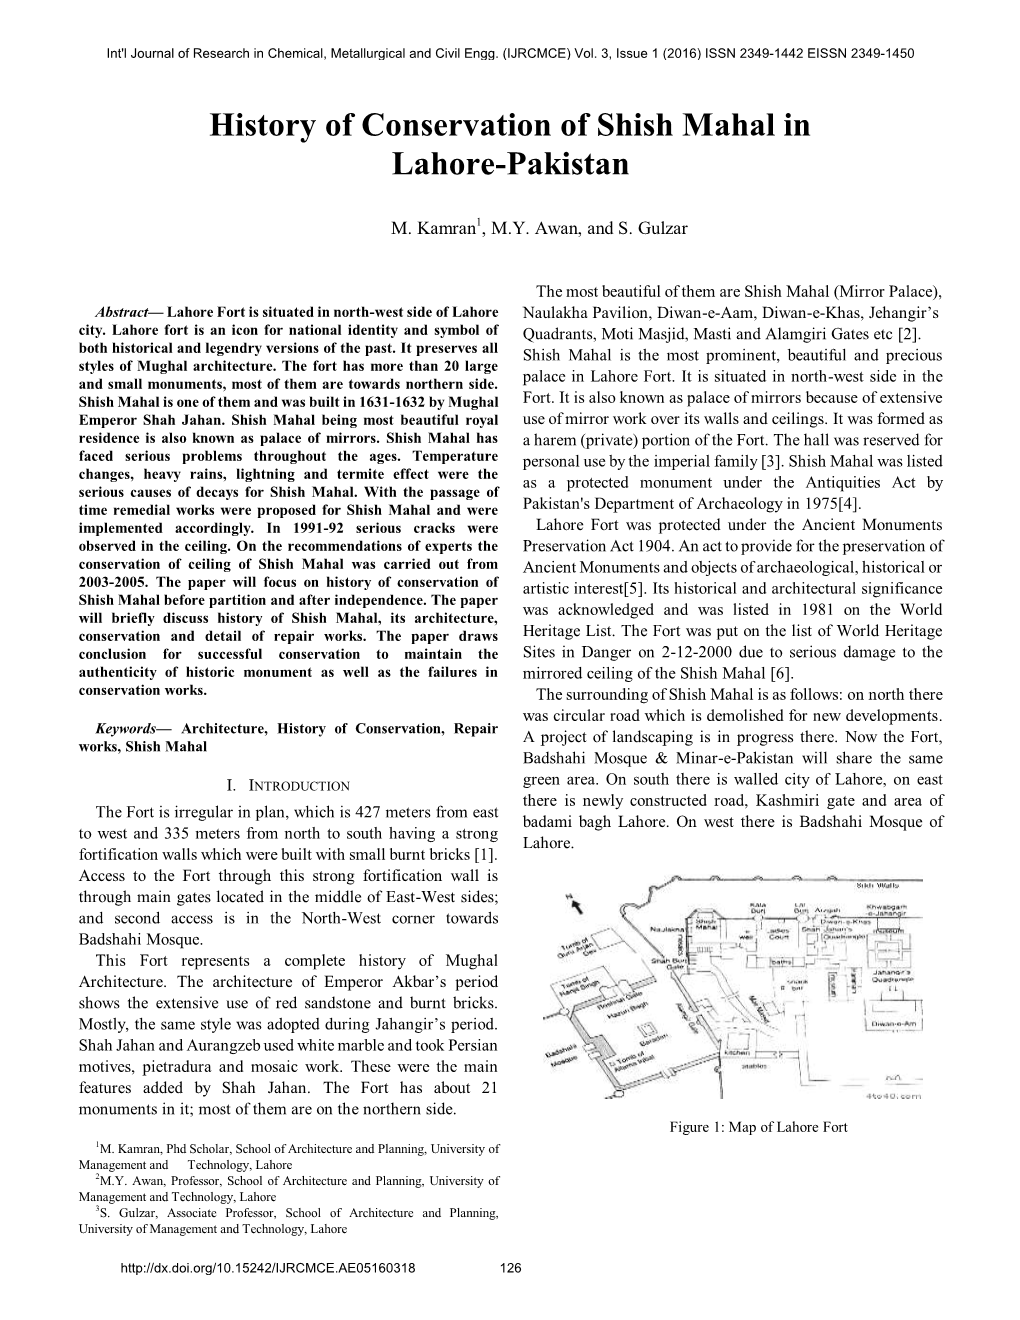 History of Conservation of Shish Mahal in Lahore-Pakistan